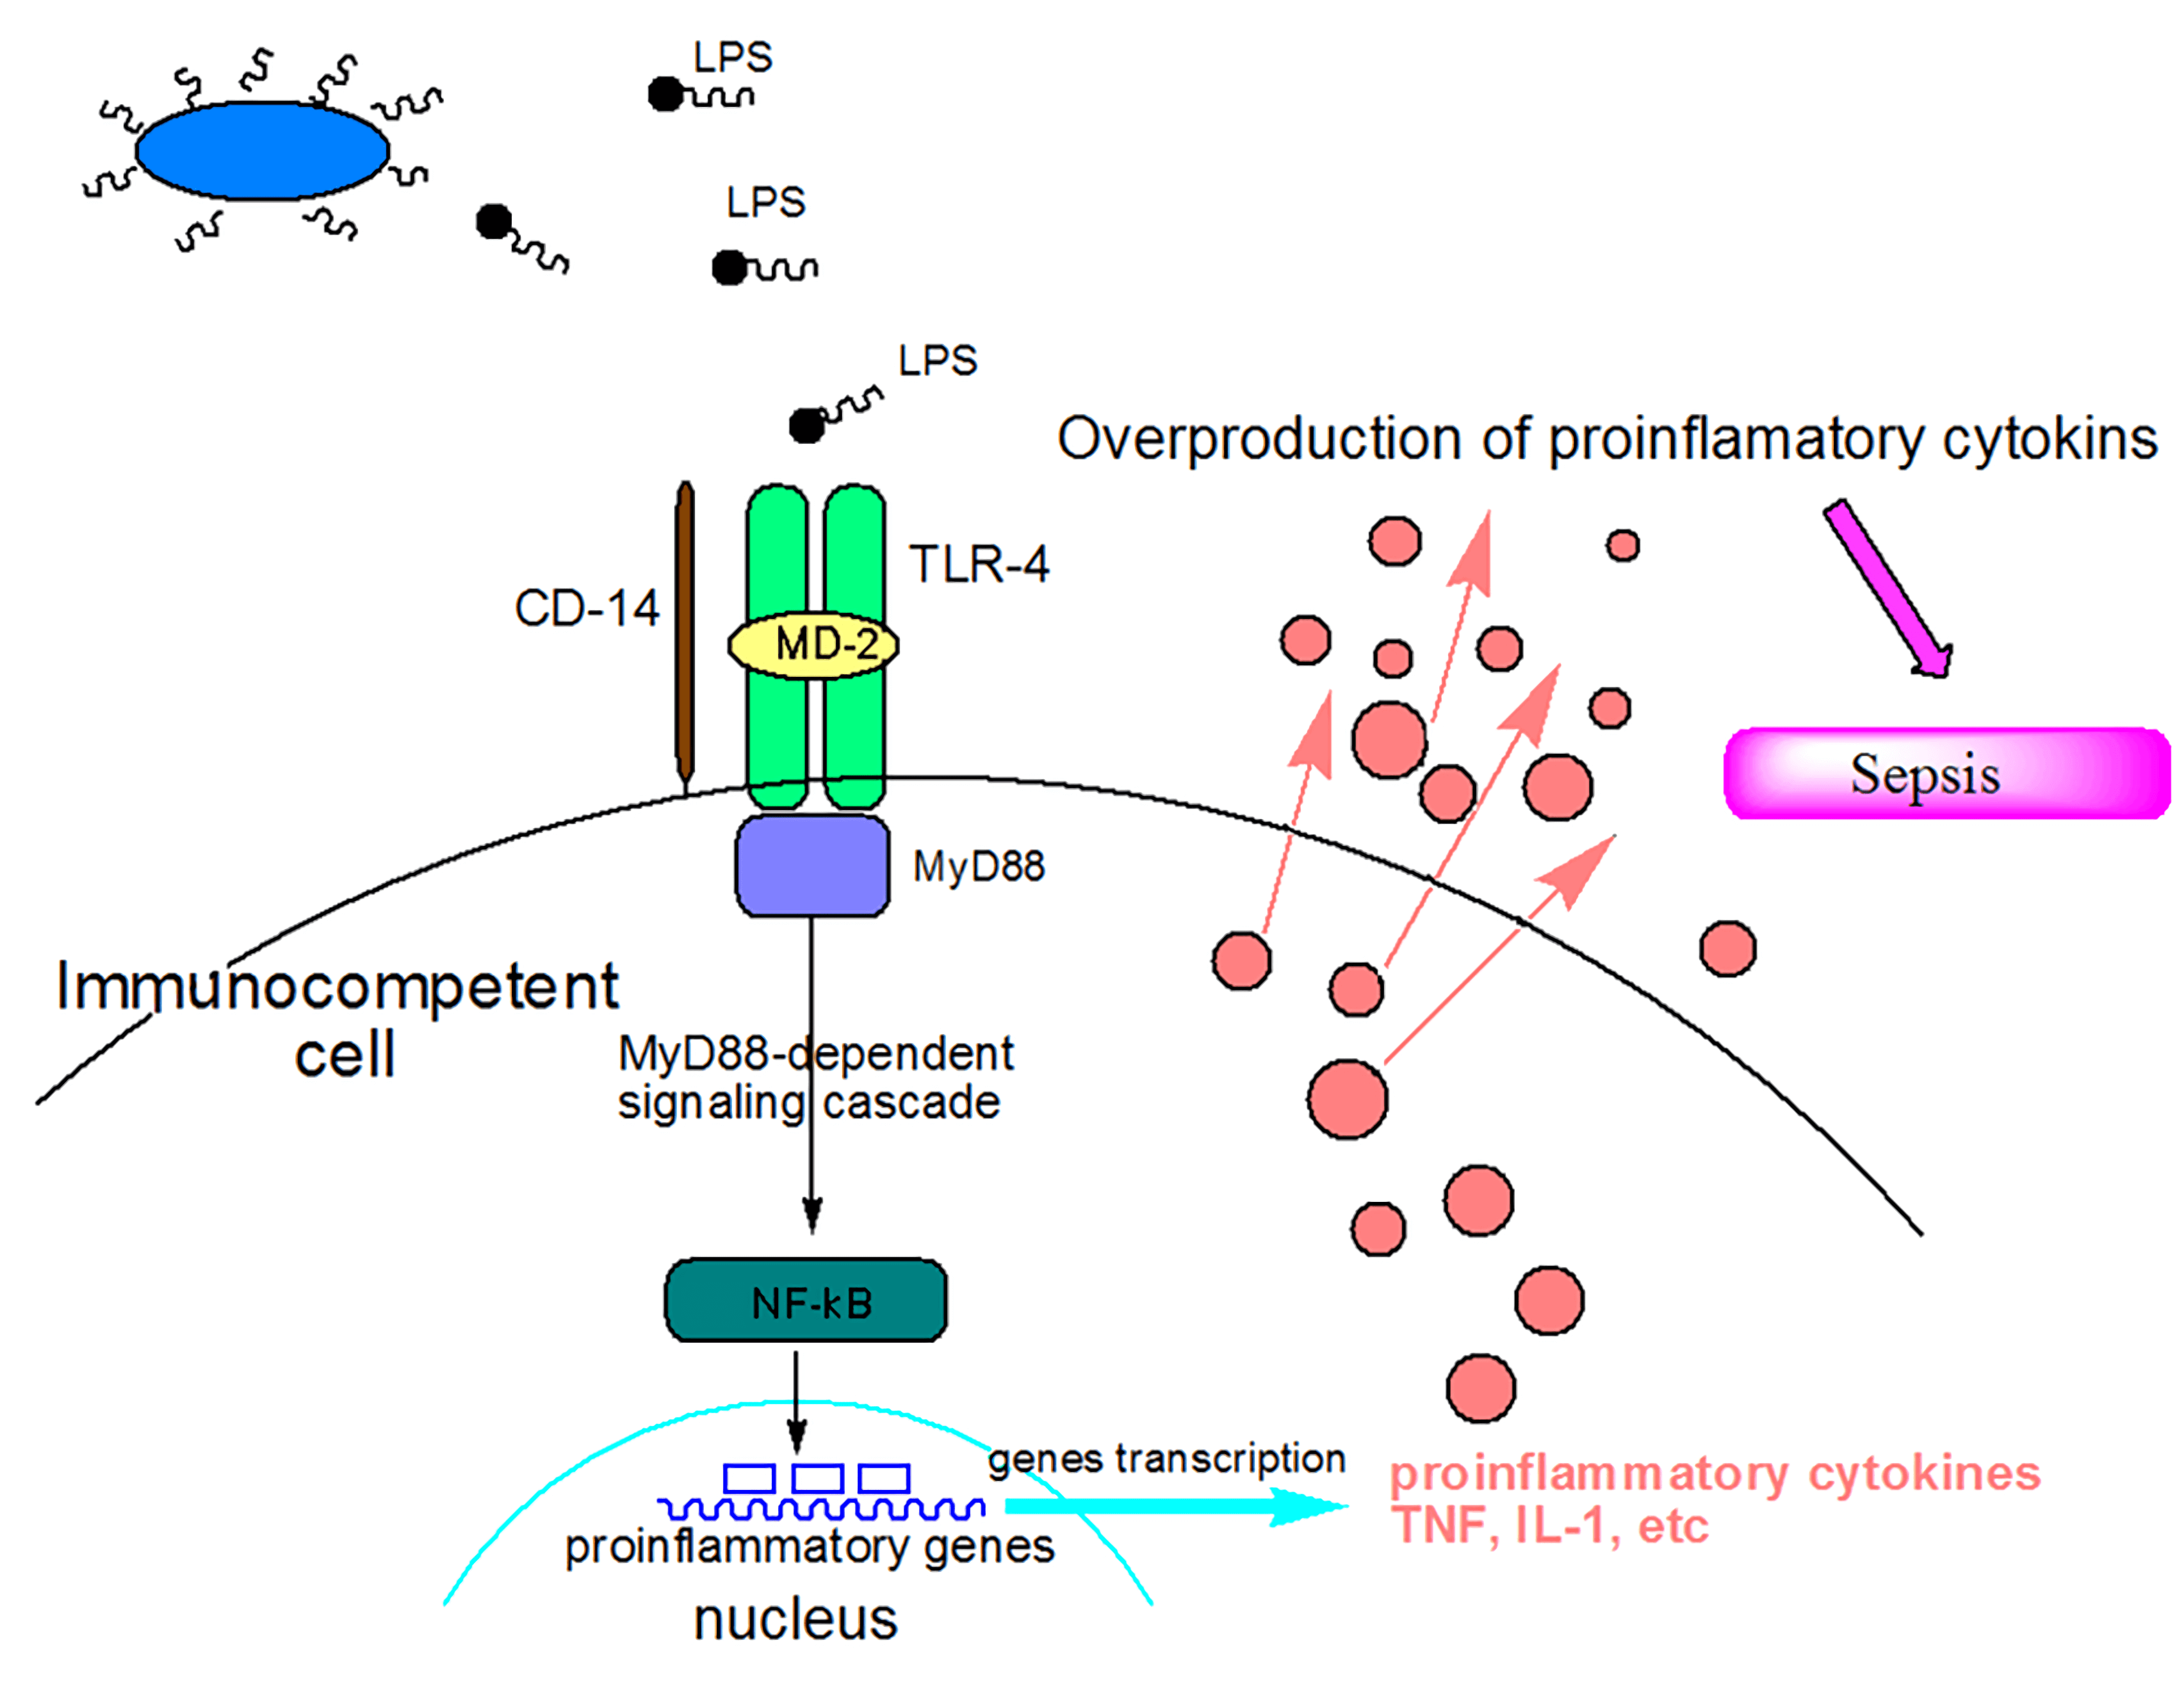 Mechanisms of action of lipopolysaccharide (LPS) as a sepsis inducer.